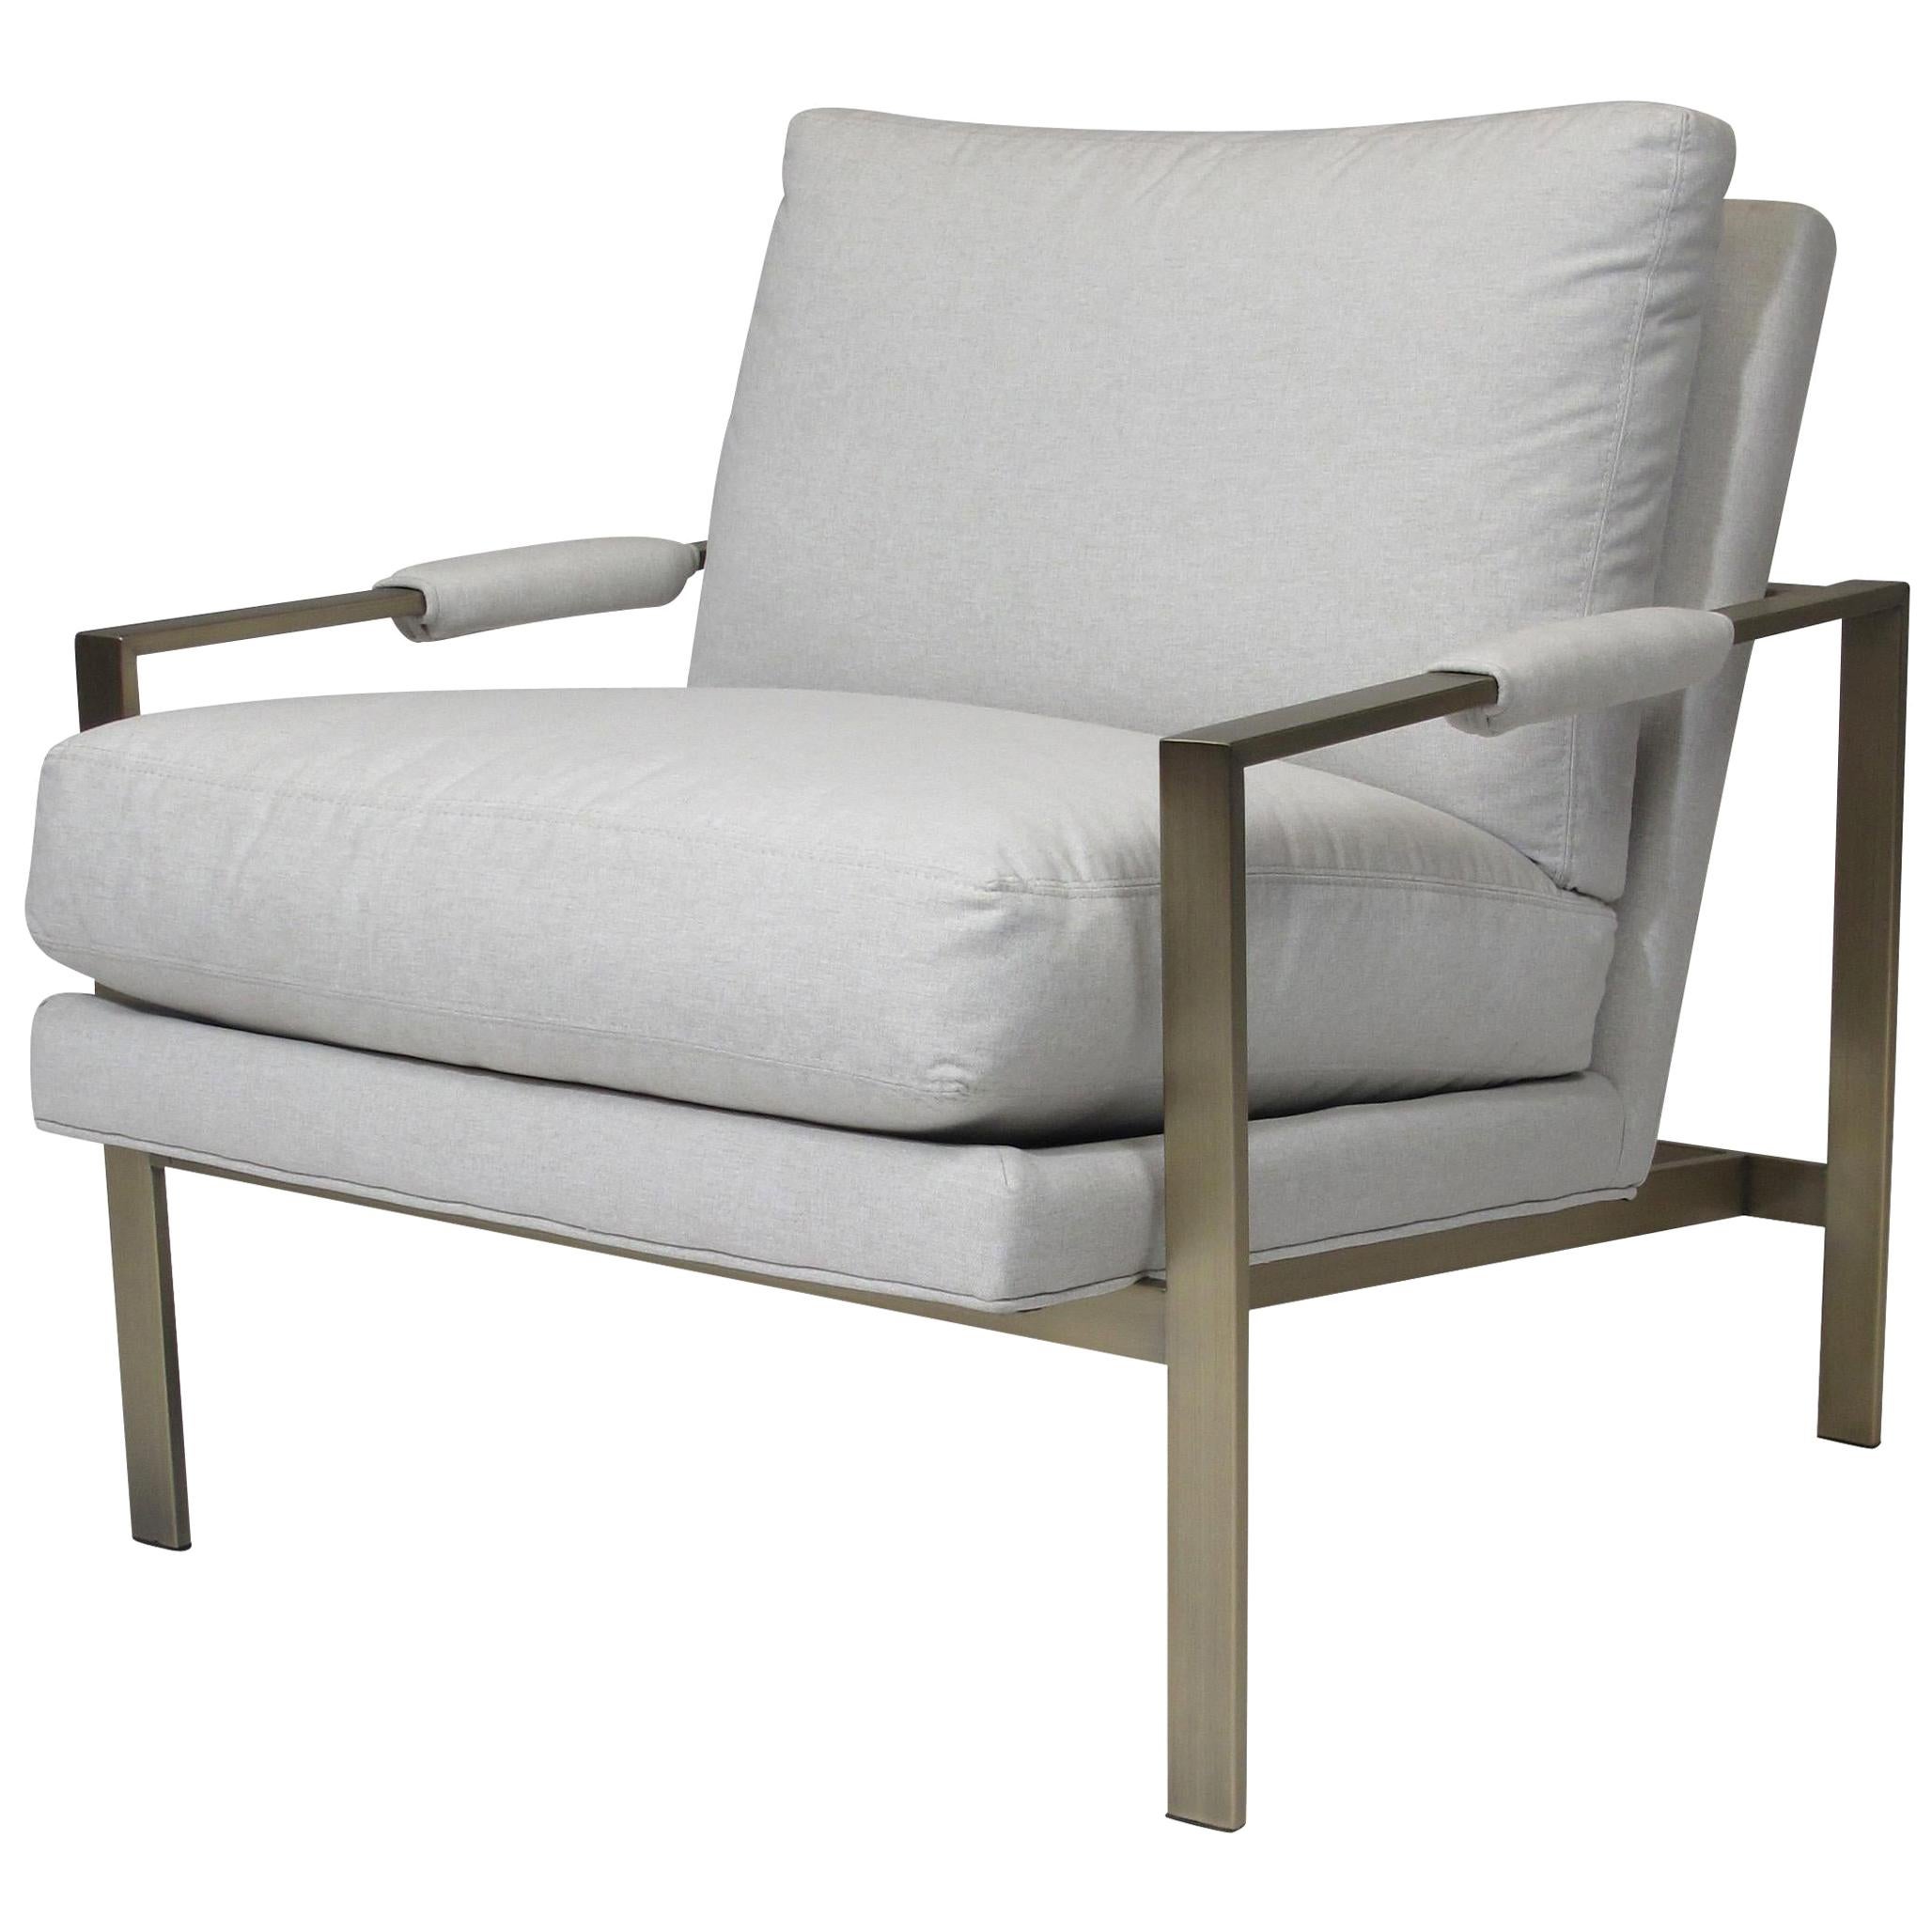 Classic Milo Baughman for Thayer Coggin lounge chairs in a brushed brass finish and off-white upholstered cushions.   Excellent condition. 


 